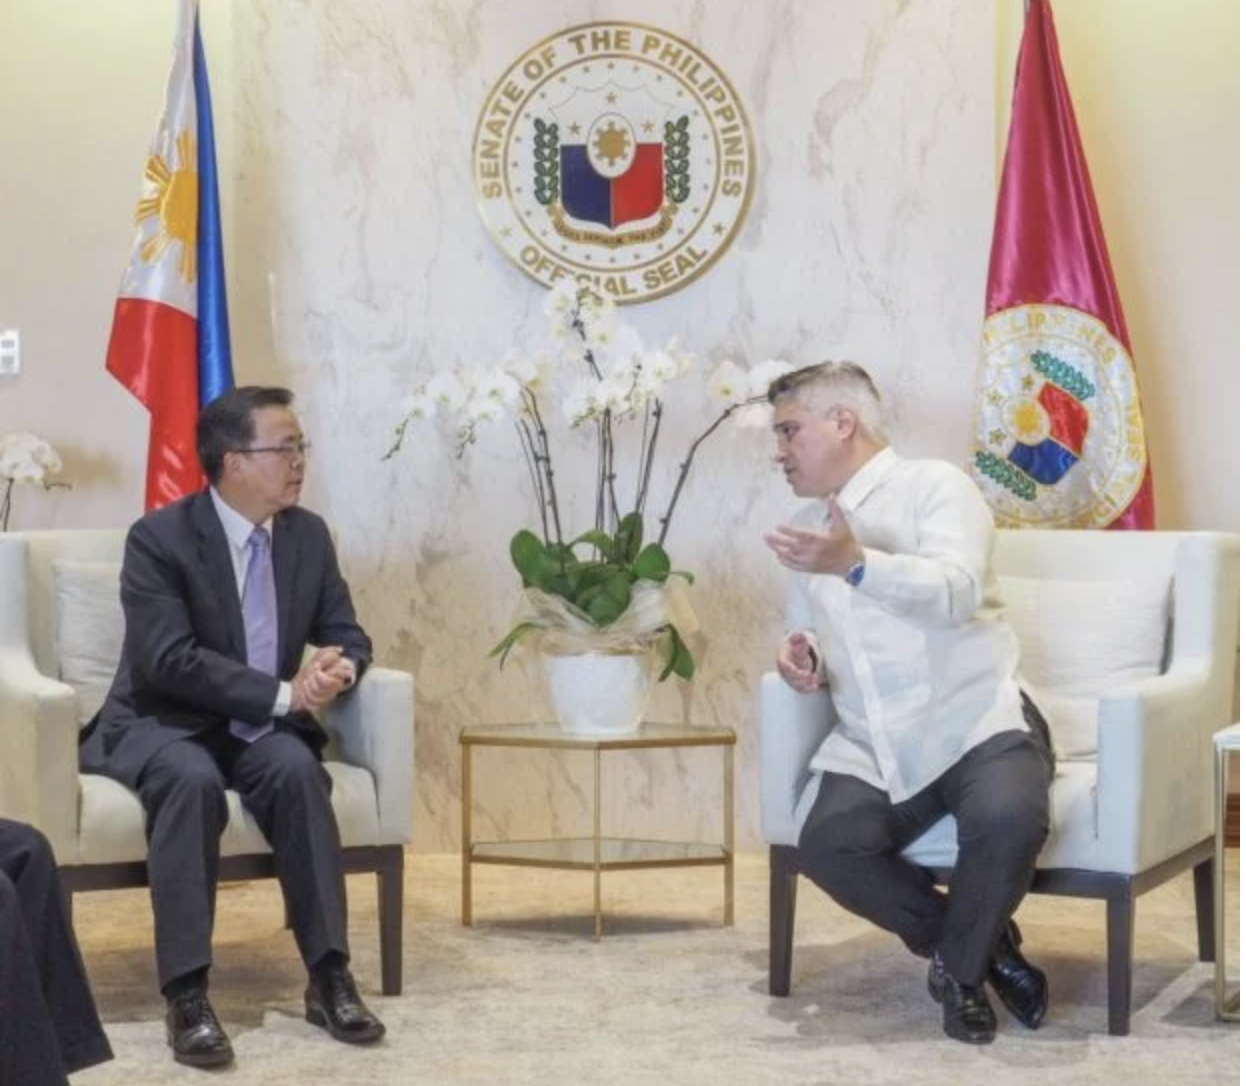 Senate President Juan Miguel Zubiri welcomes H.E. Huang Xilian, Ambassador of the People’s Republic of China to the Philippines, at the Senate on October 10, 2022. Photo by 